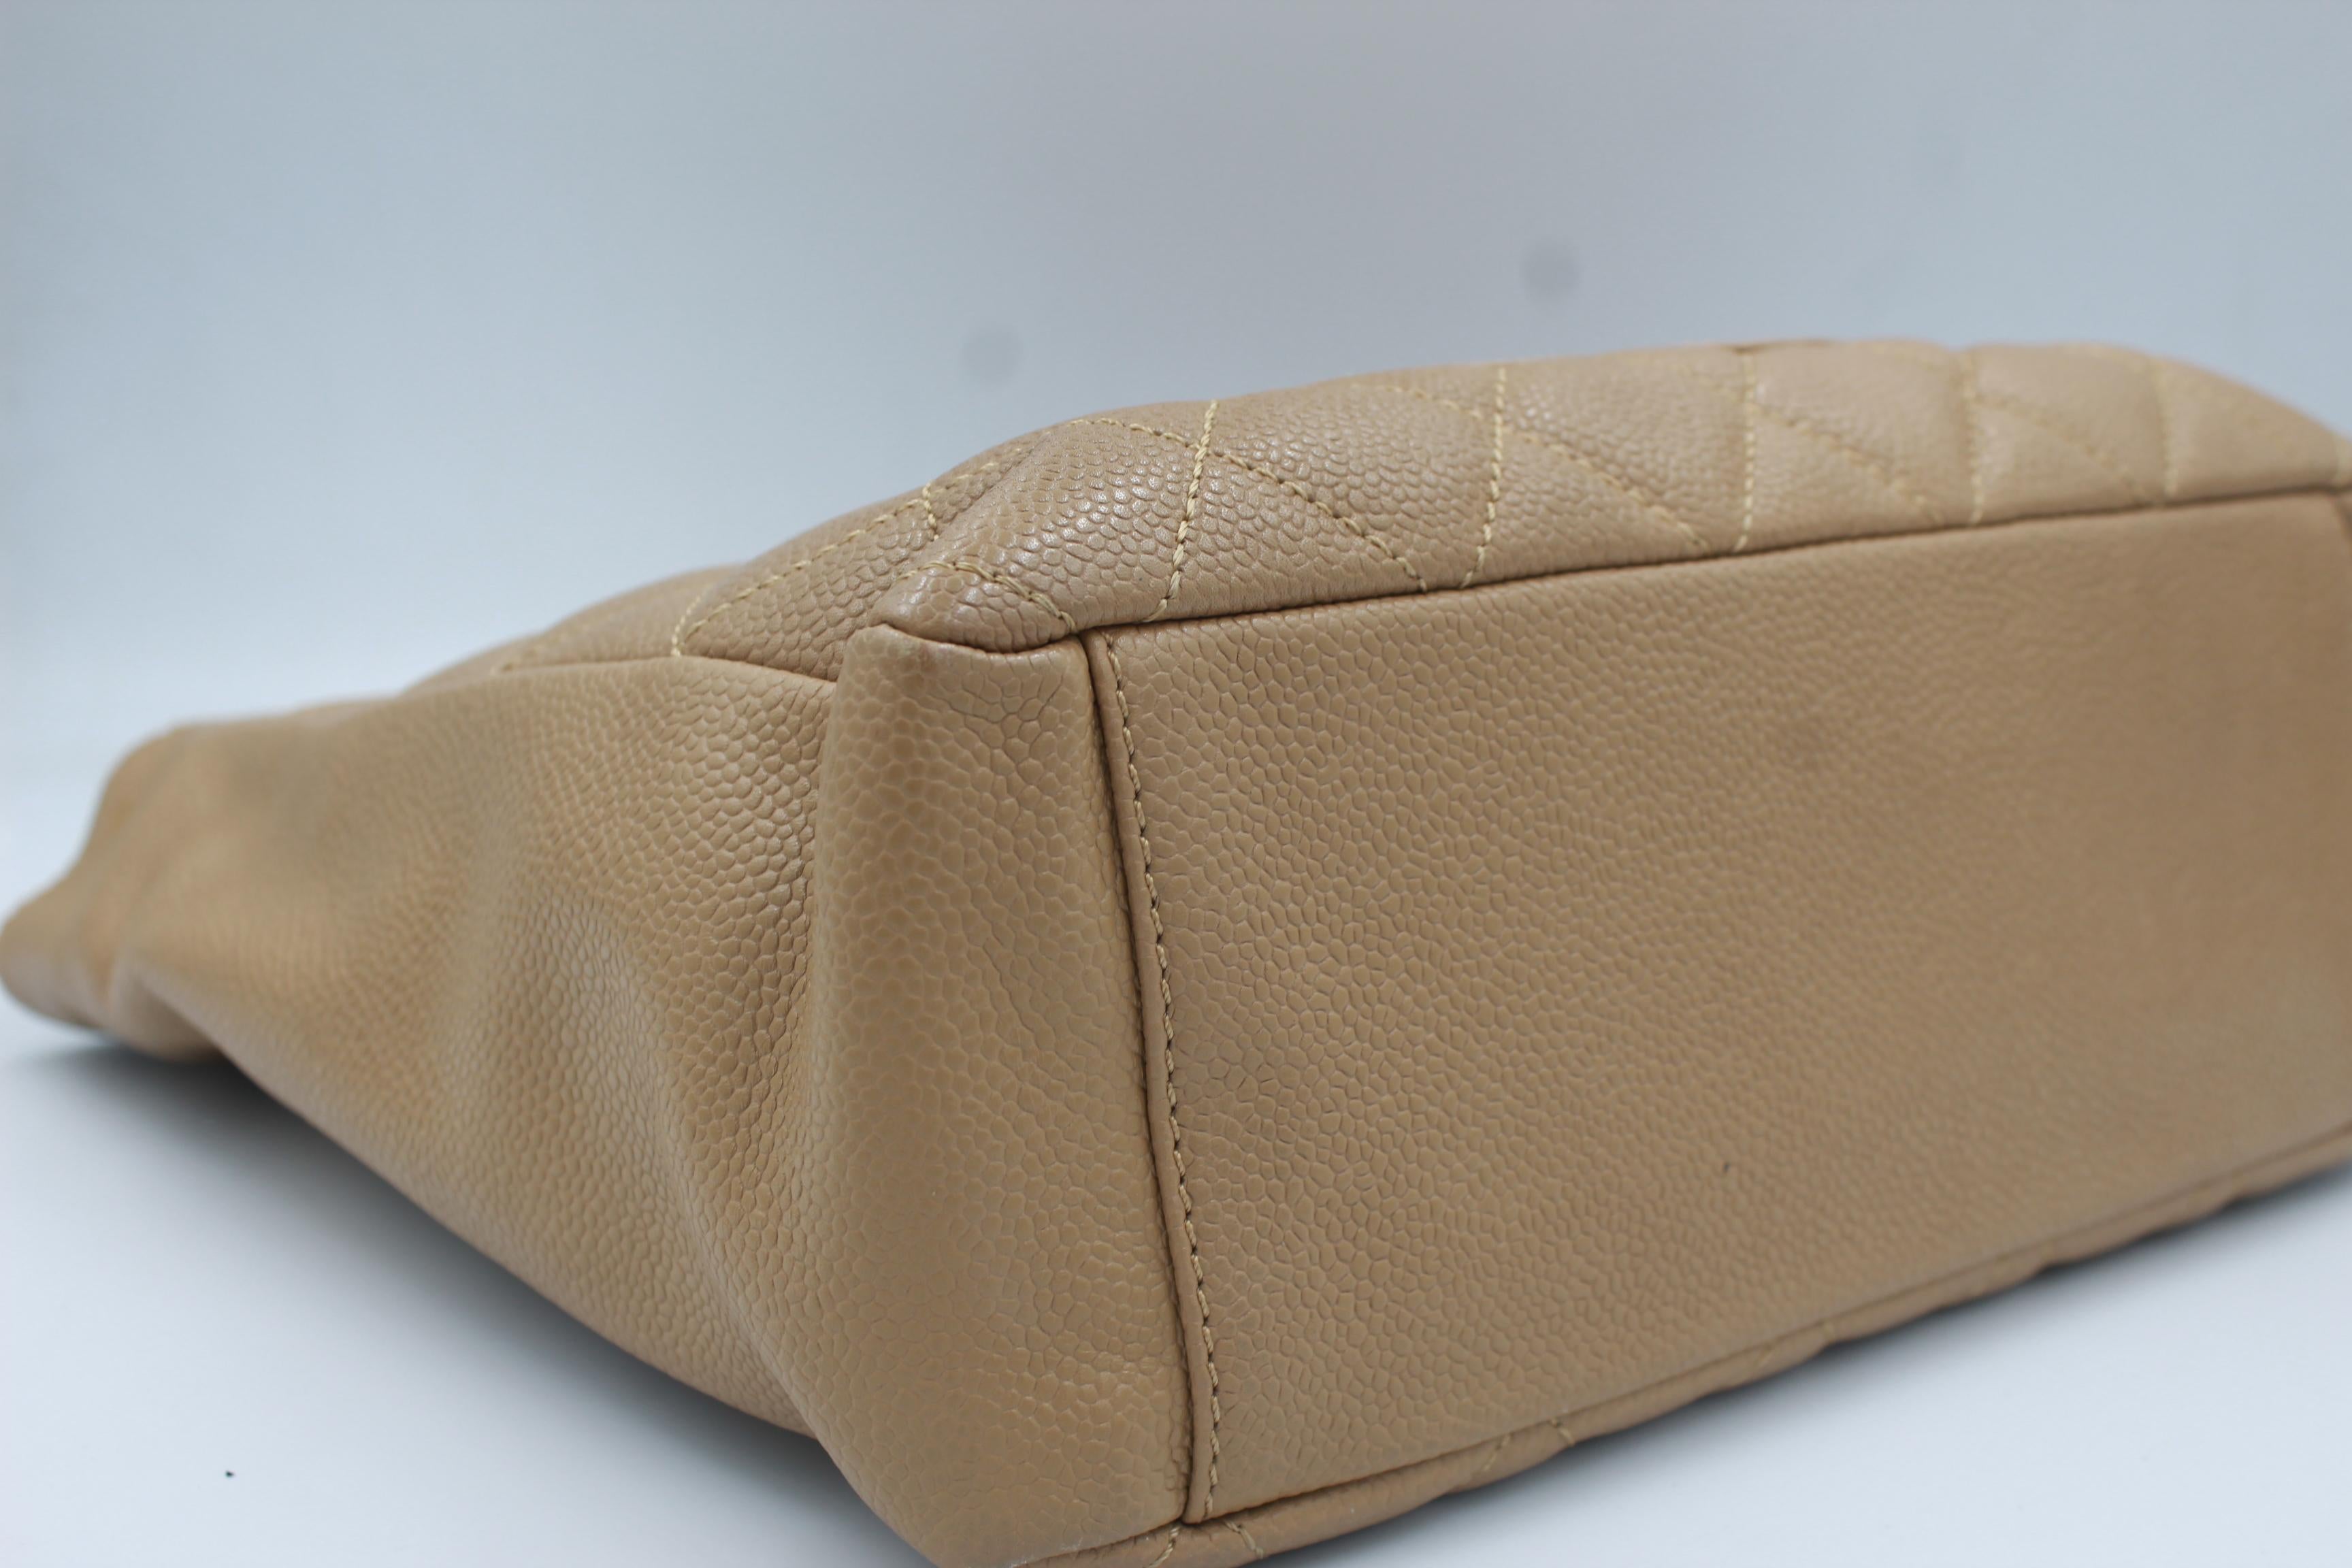 Beige Chanel bag in beige leather For Sale